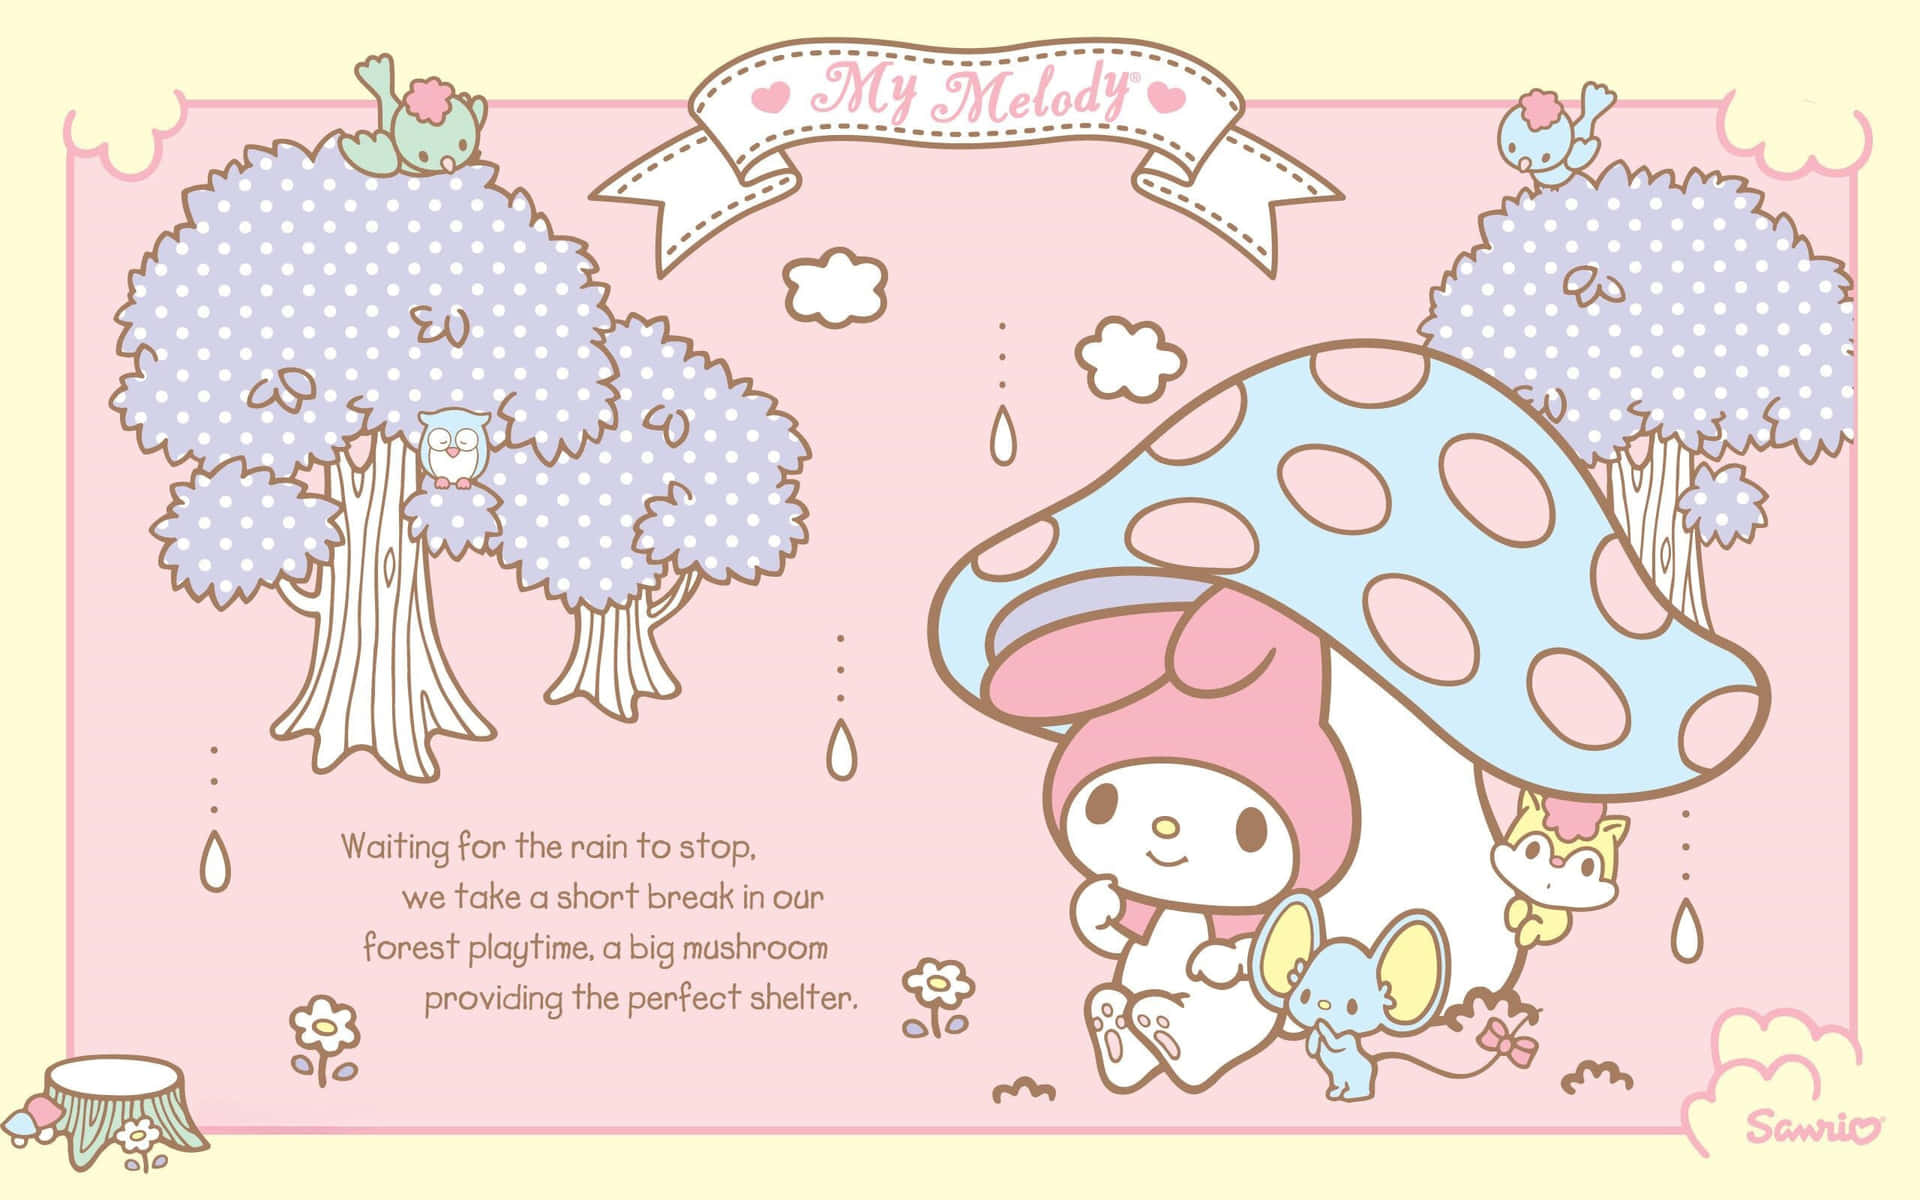 Get ready for a fun-filled day with Sanrio!